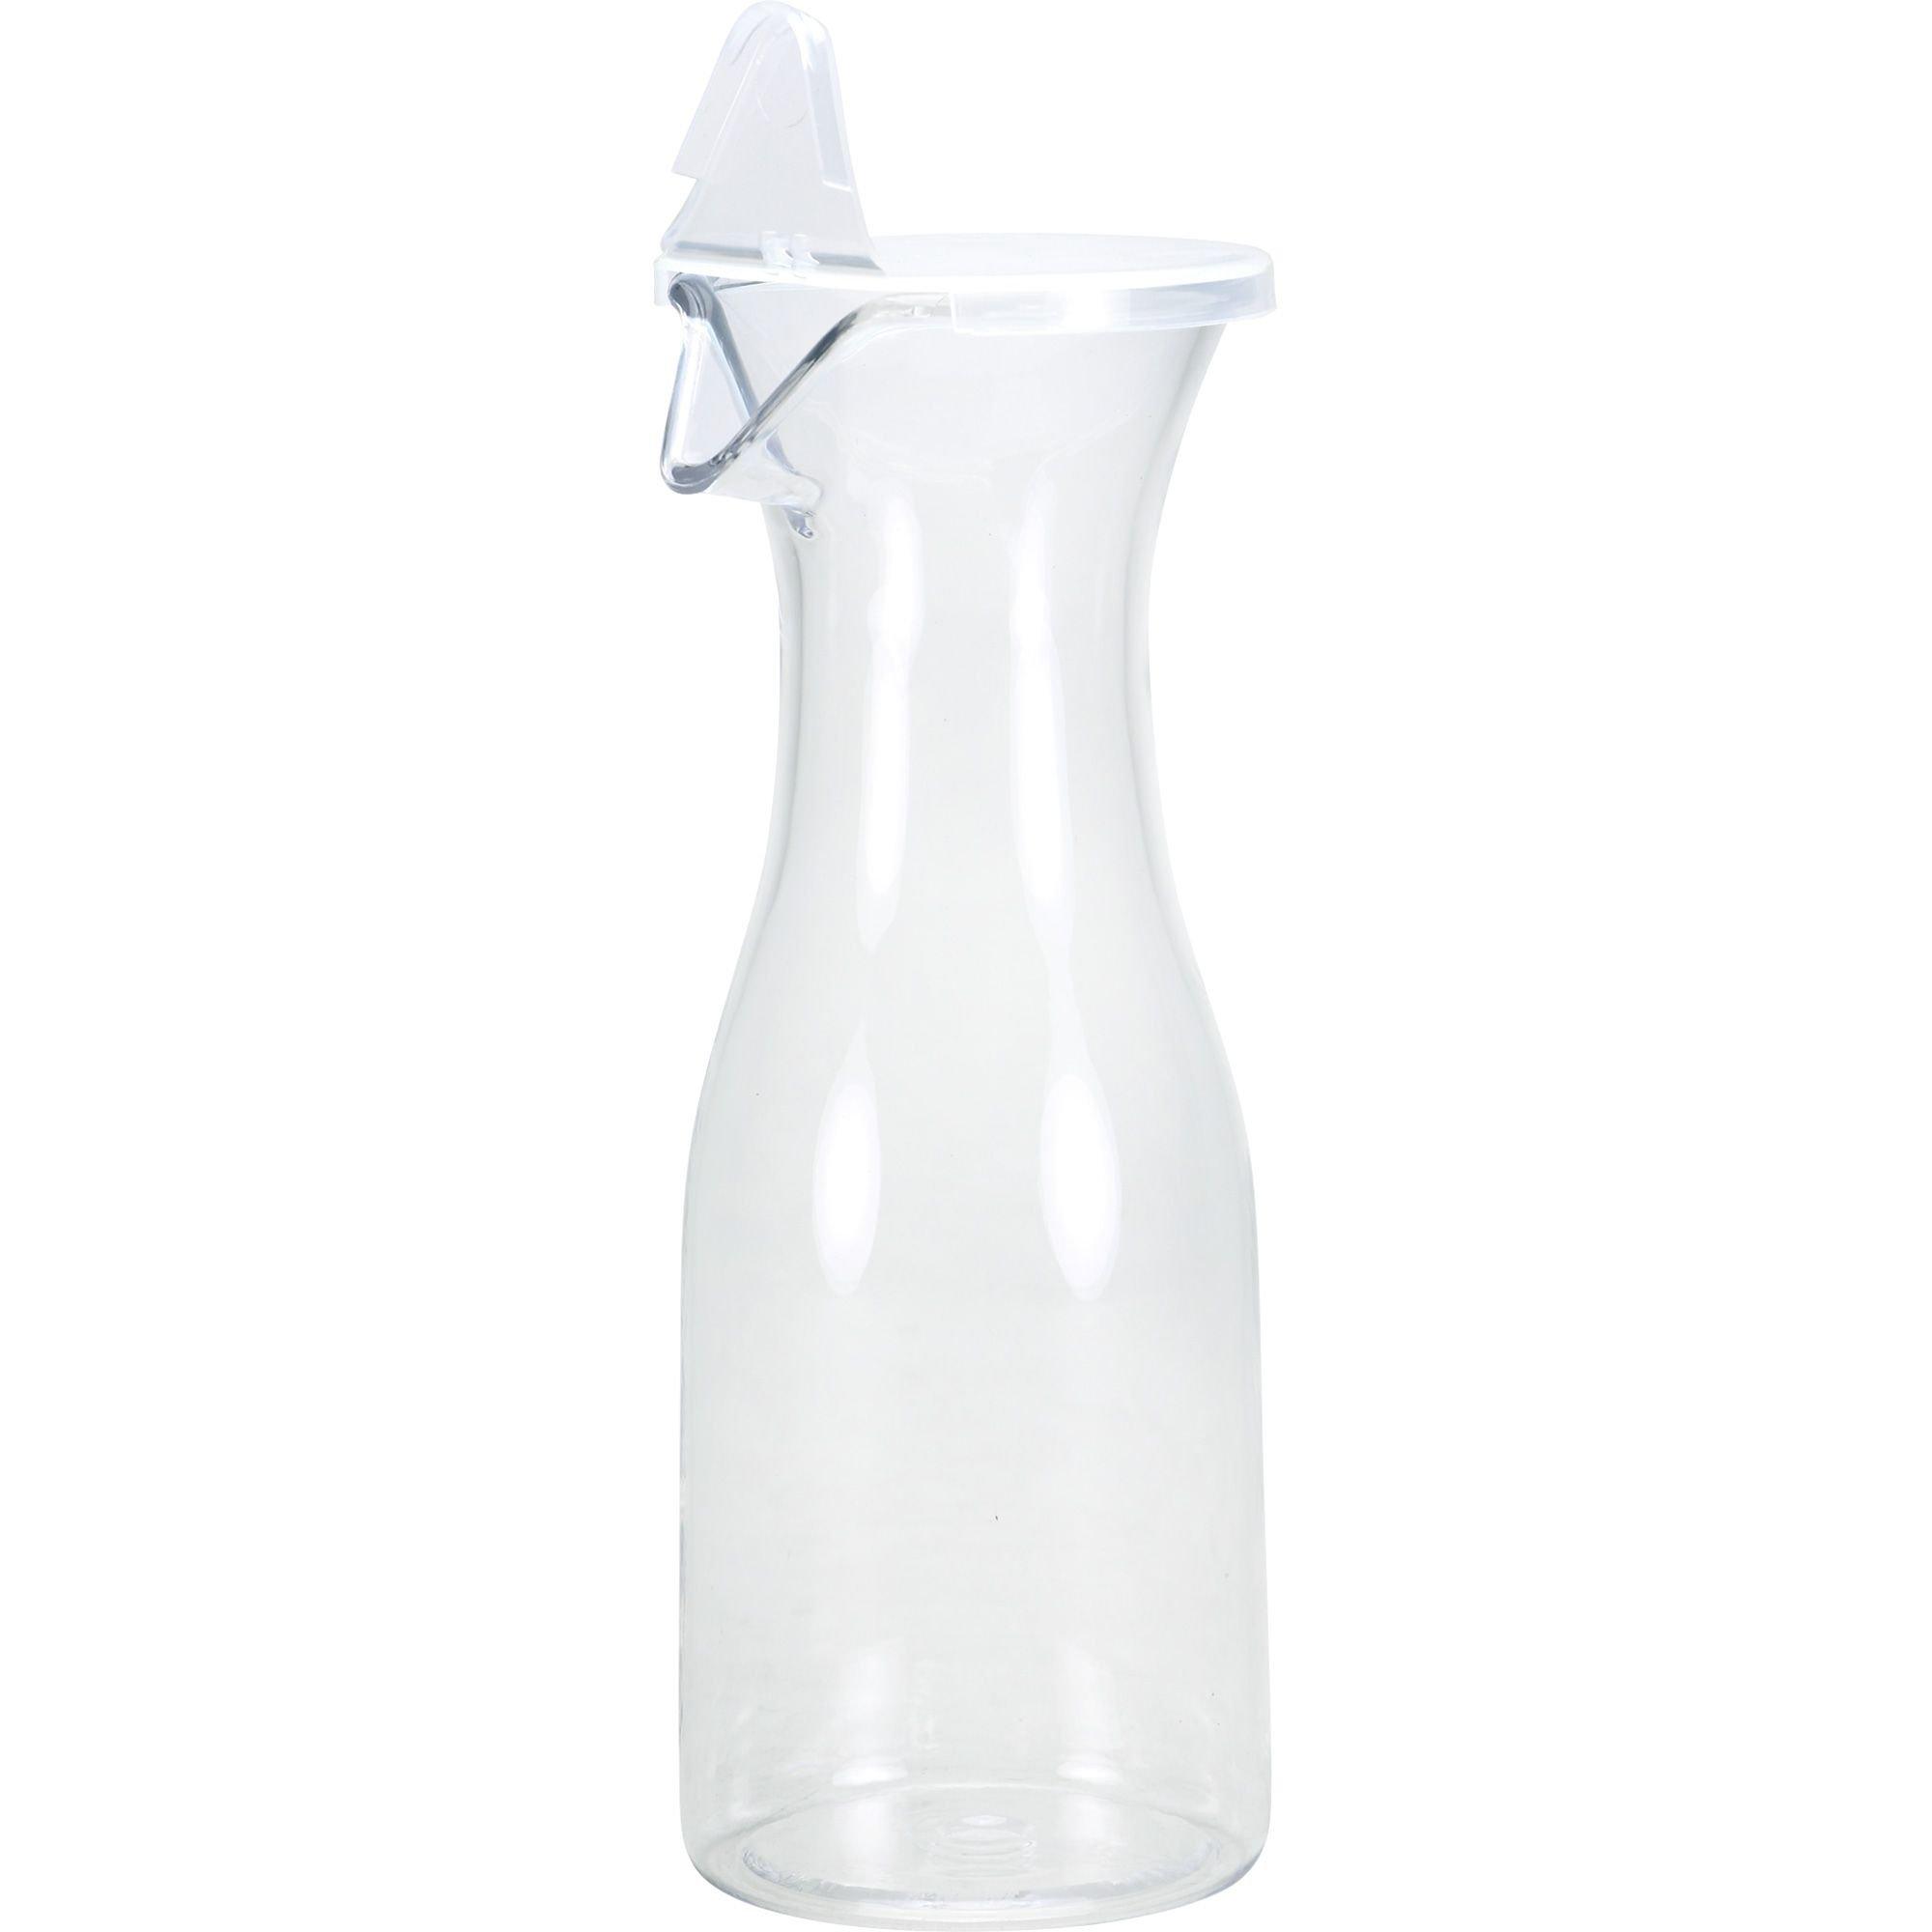 Bar Lux 34 oz Clear Plastic Carafe - with Lid - 1 count box